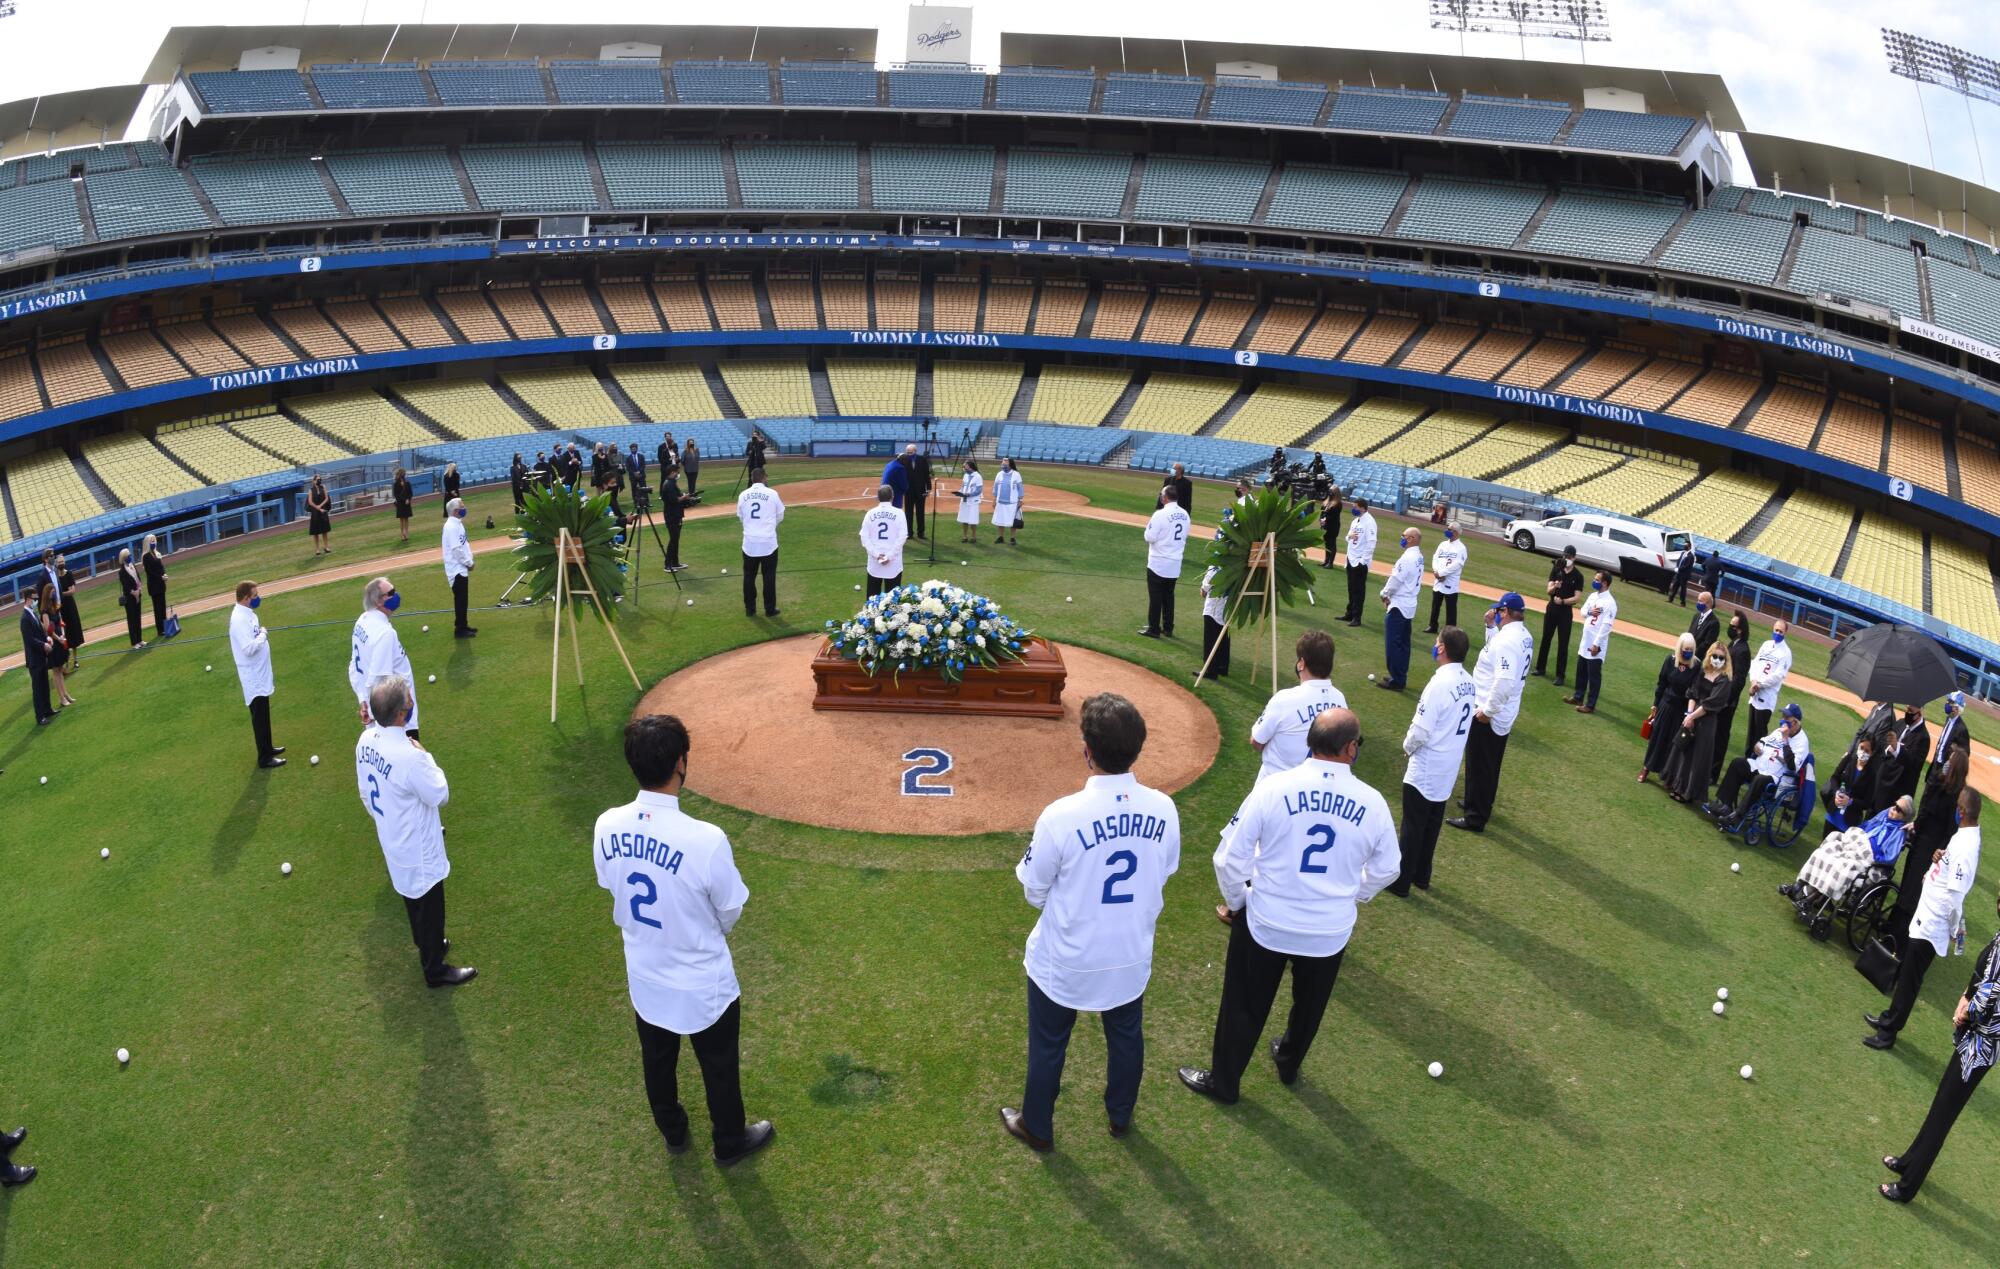 Dodgers: Tommy Lasorda's ceremony at Dodger Stadium looked incredible